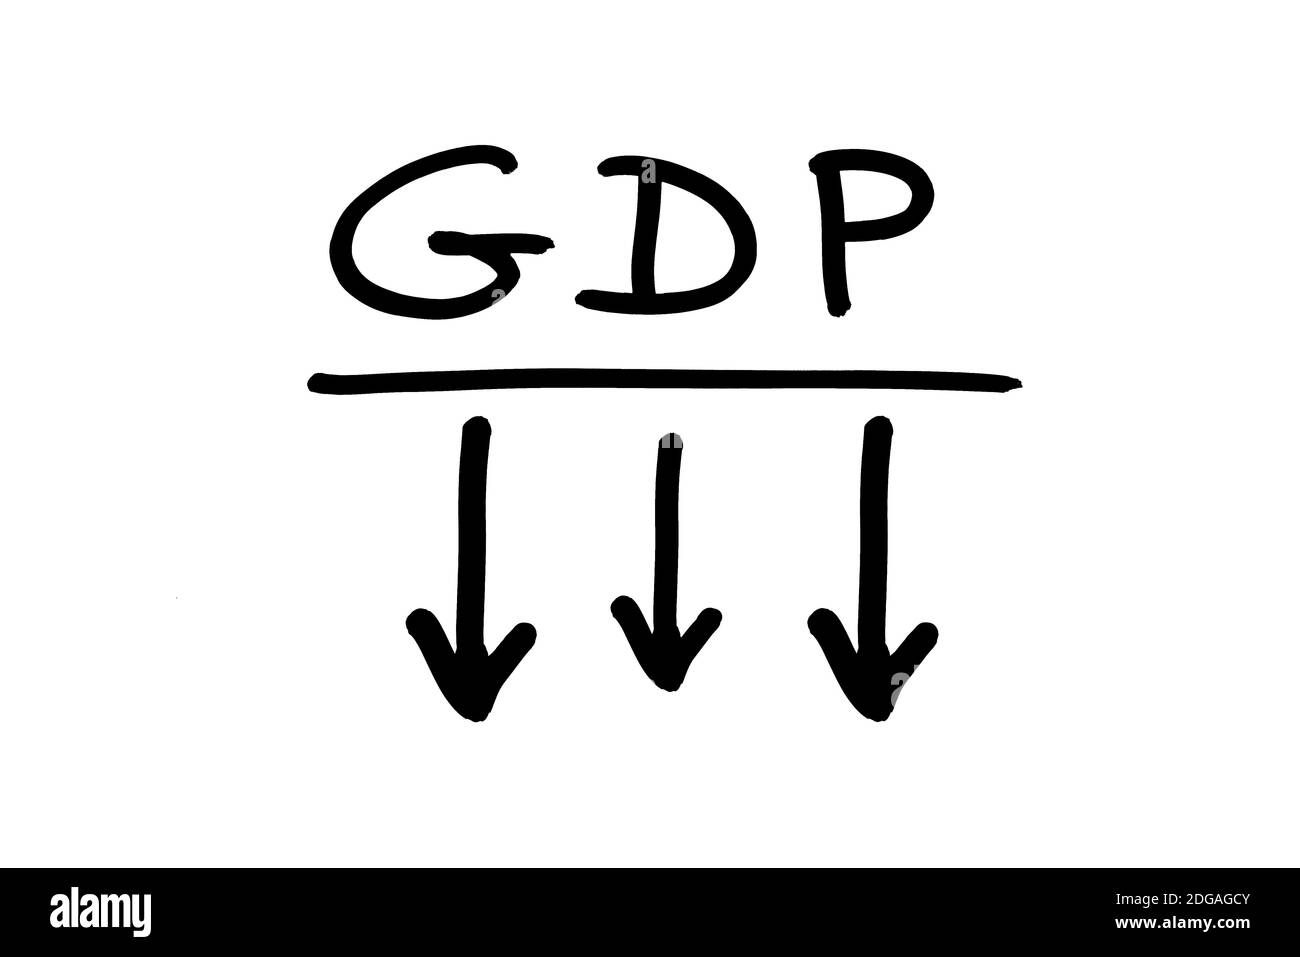 Gdp meaning